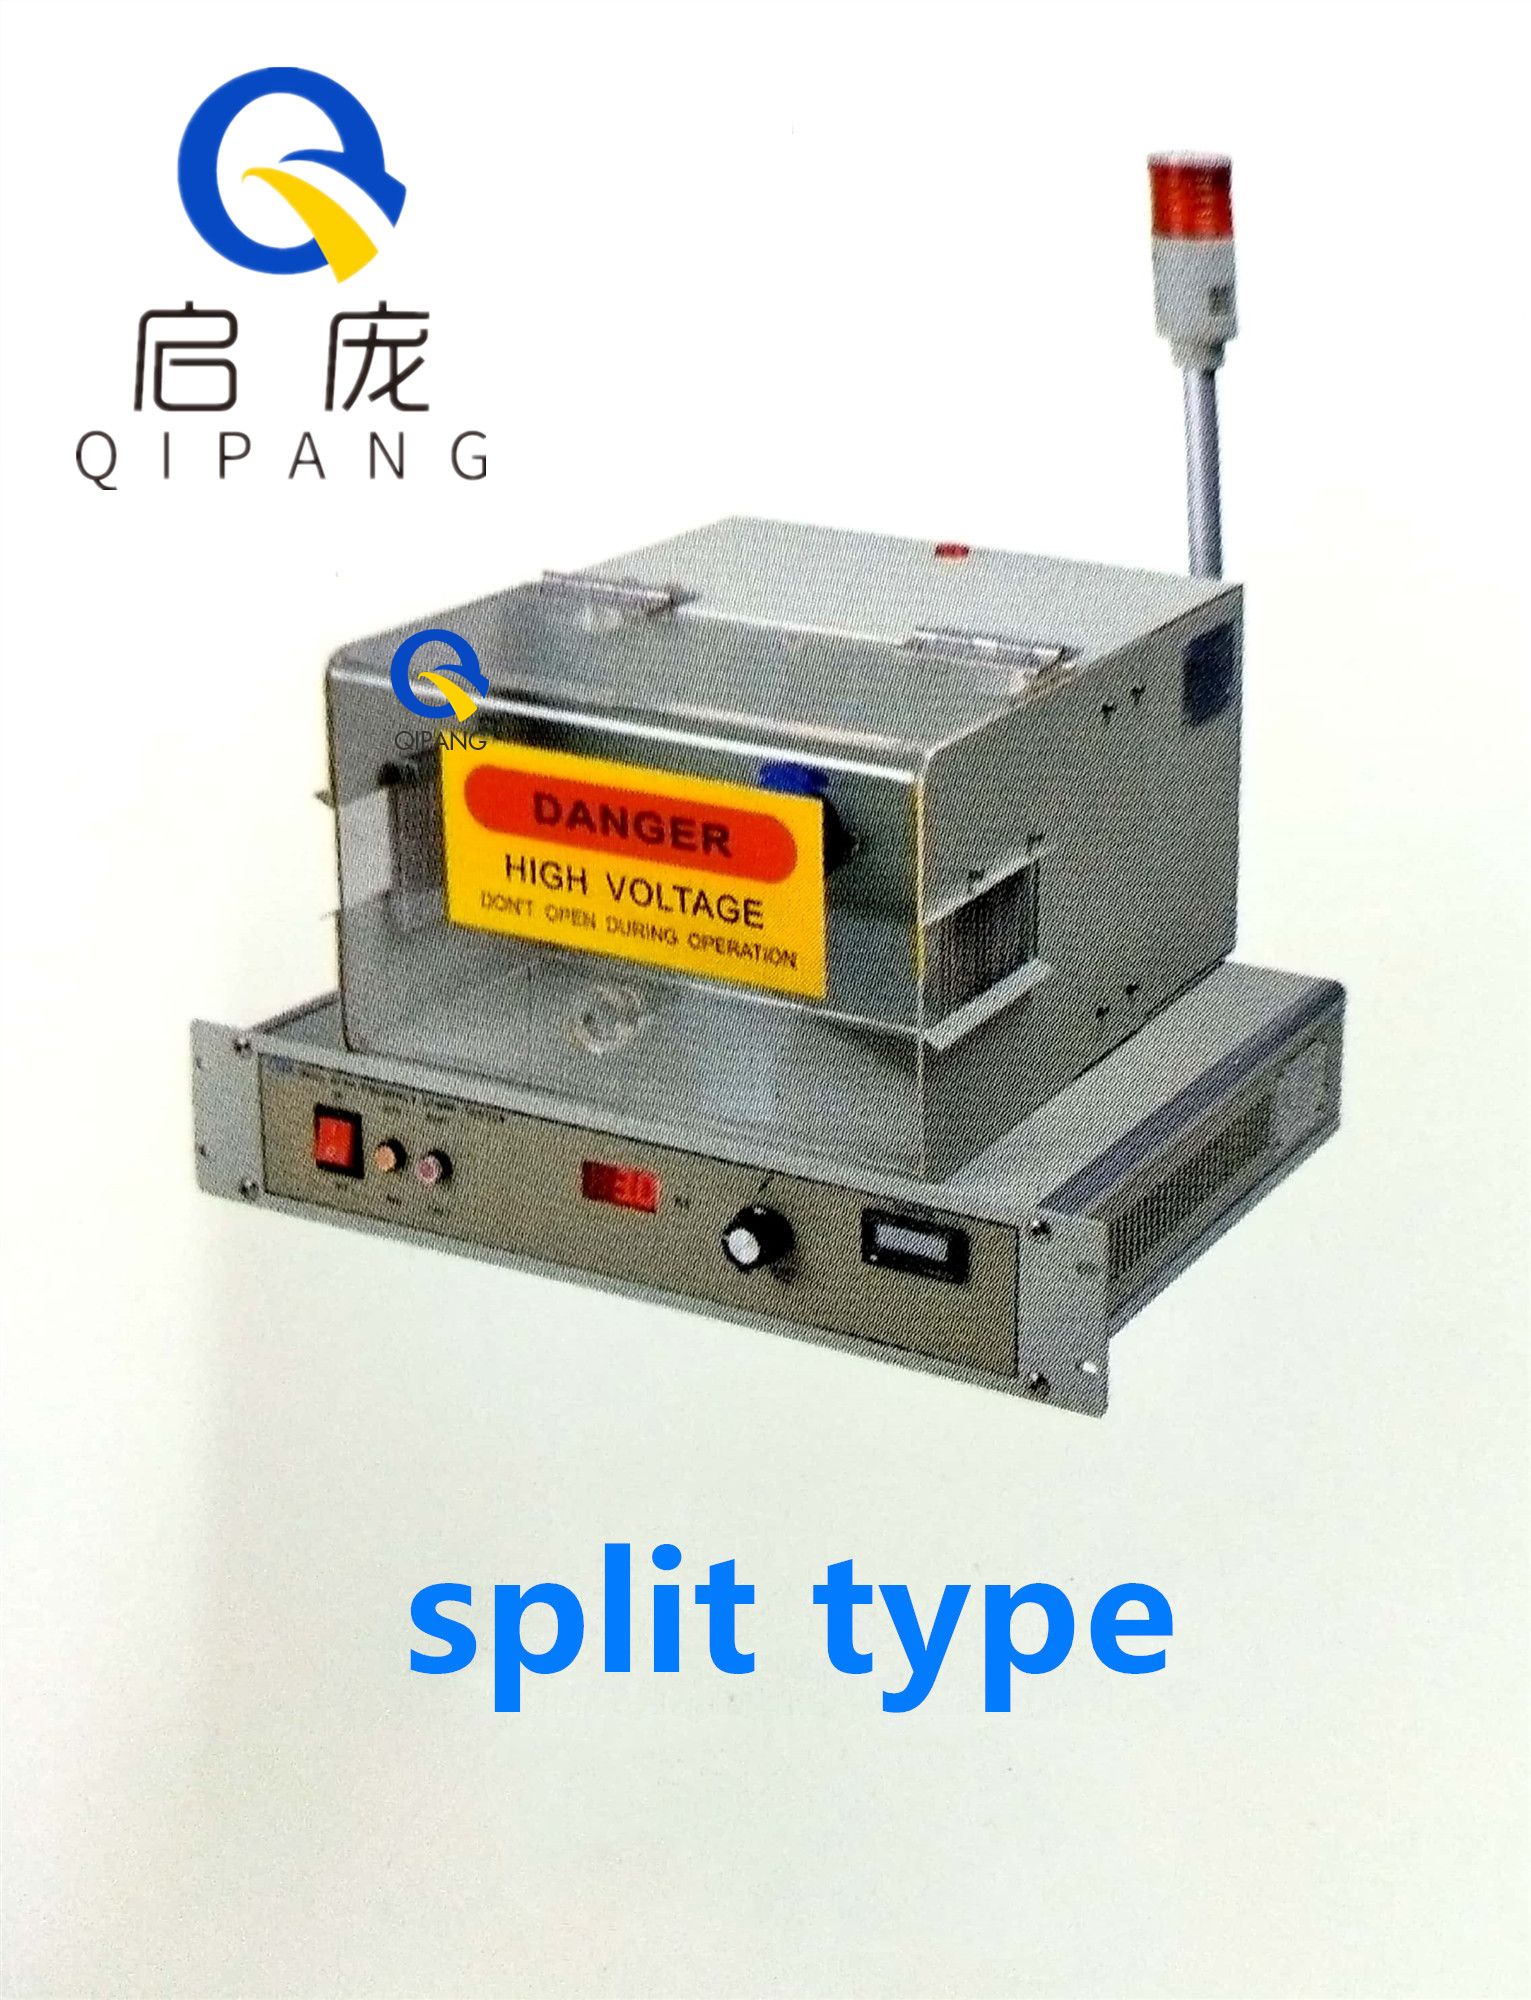 QIPANG GS-15S high frequency spark tester for wire and cable insulation wrapper tester